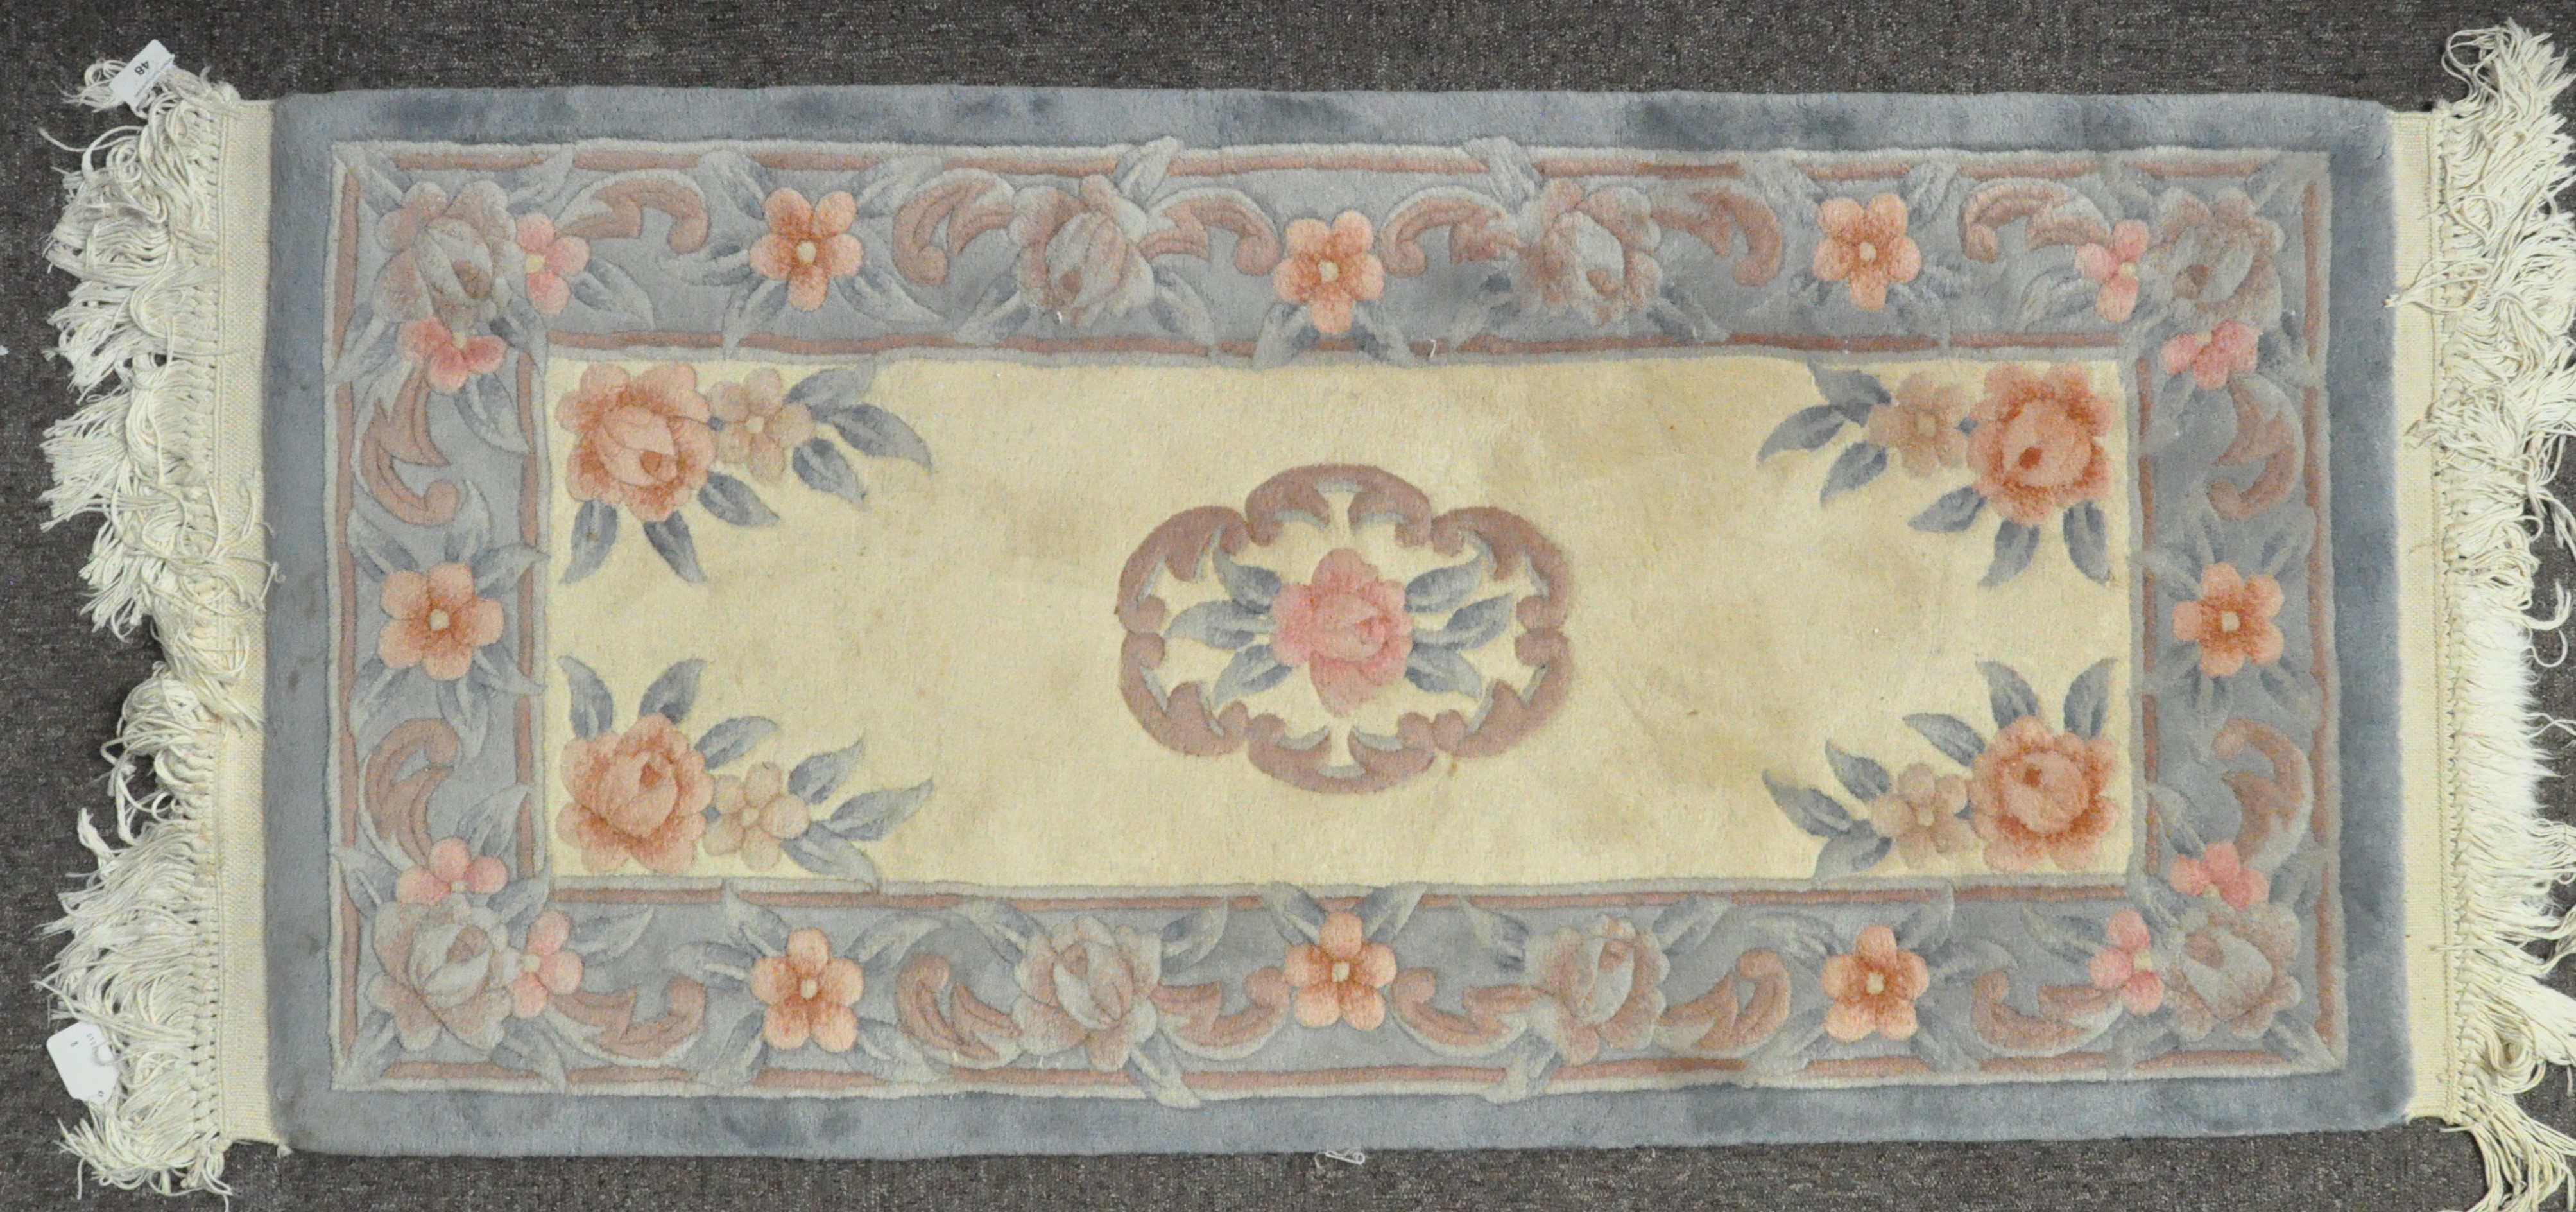 A small Chinese rug, 20th century, woven with flowers on ivory cream ground, - Image 2 of 2